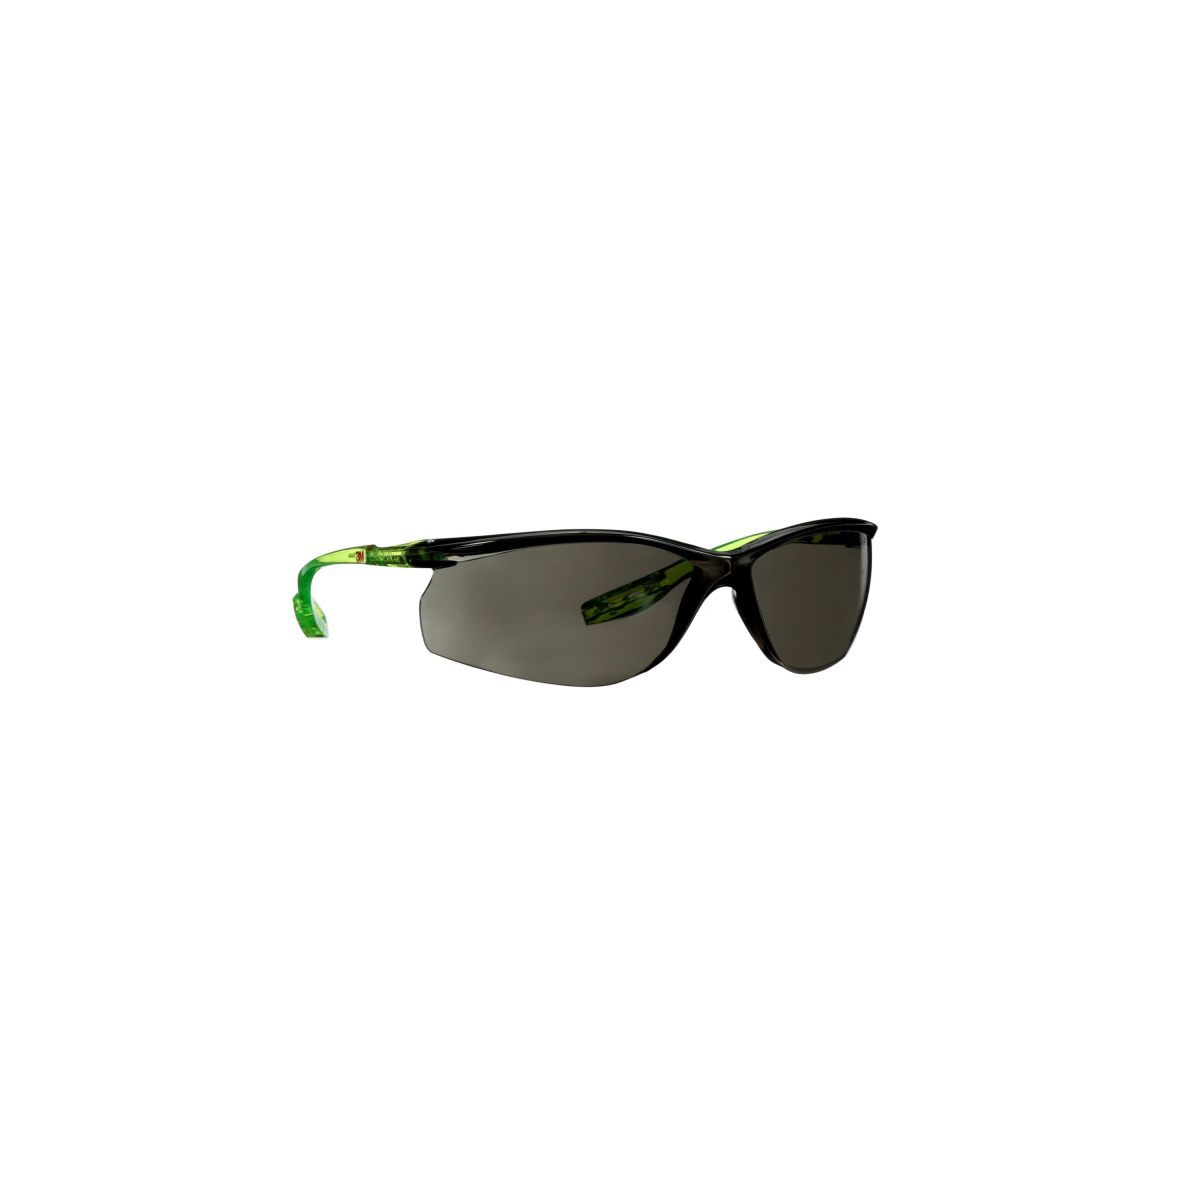 3M™ Solus™ CCS Series Black And Bright Green Safety Glasses With Gray Scotchgard™ Anti-Fog/Anti-Scratch Lens (Availability restr